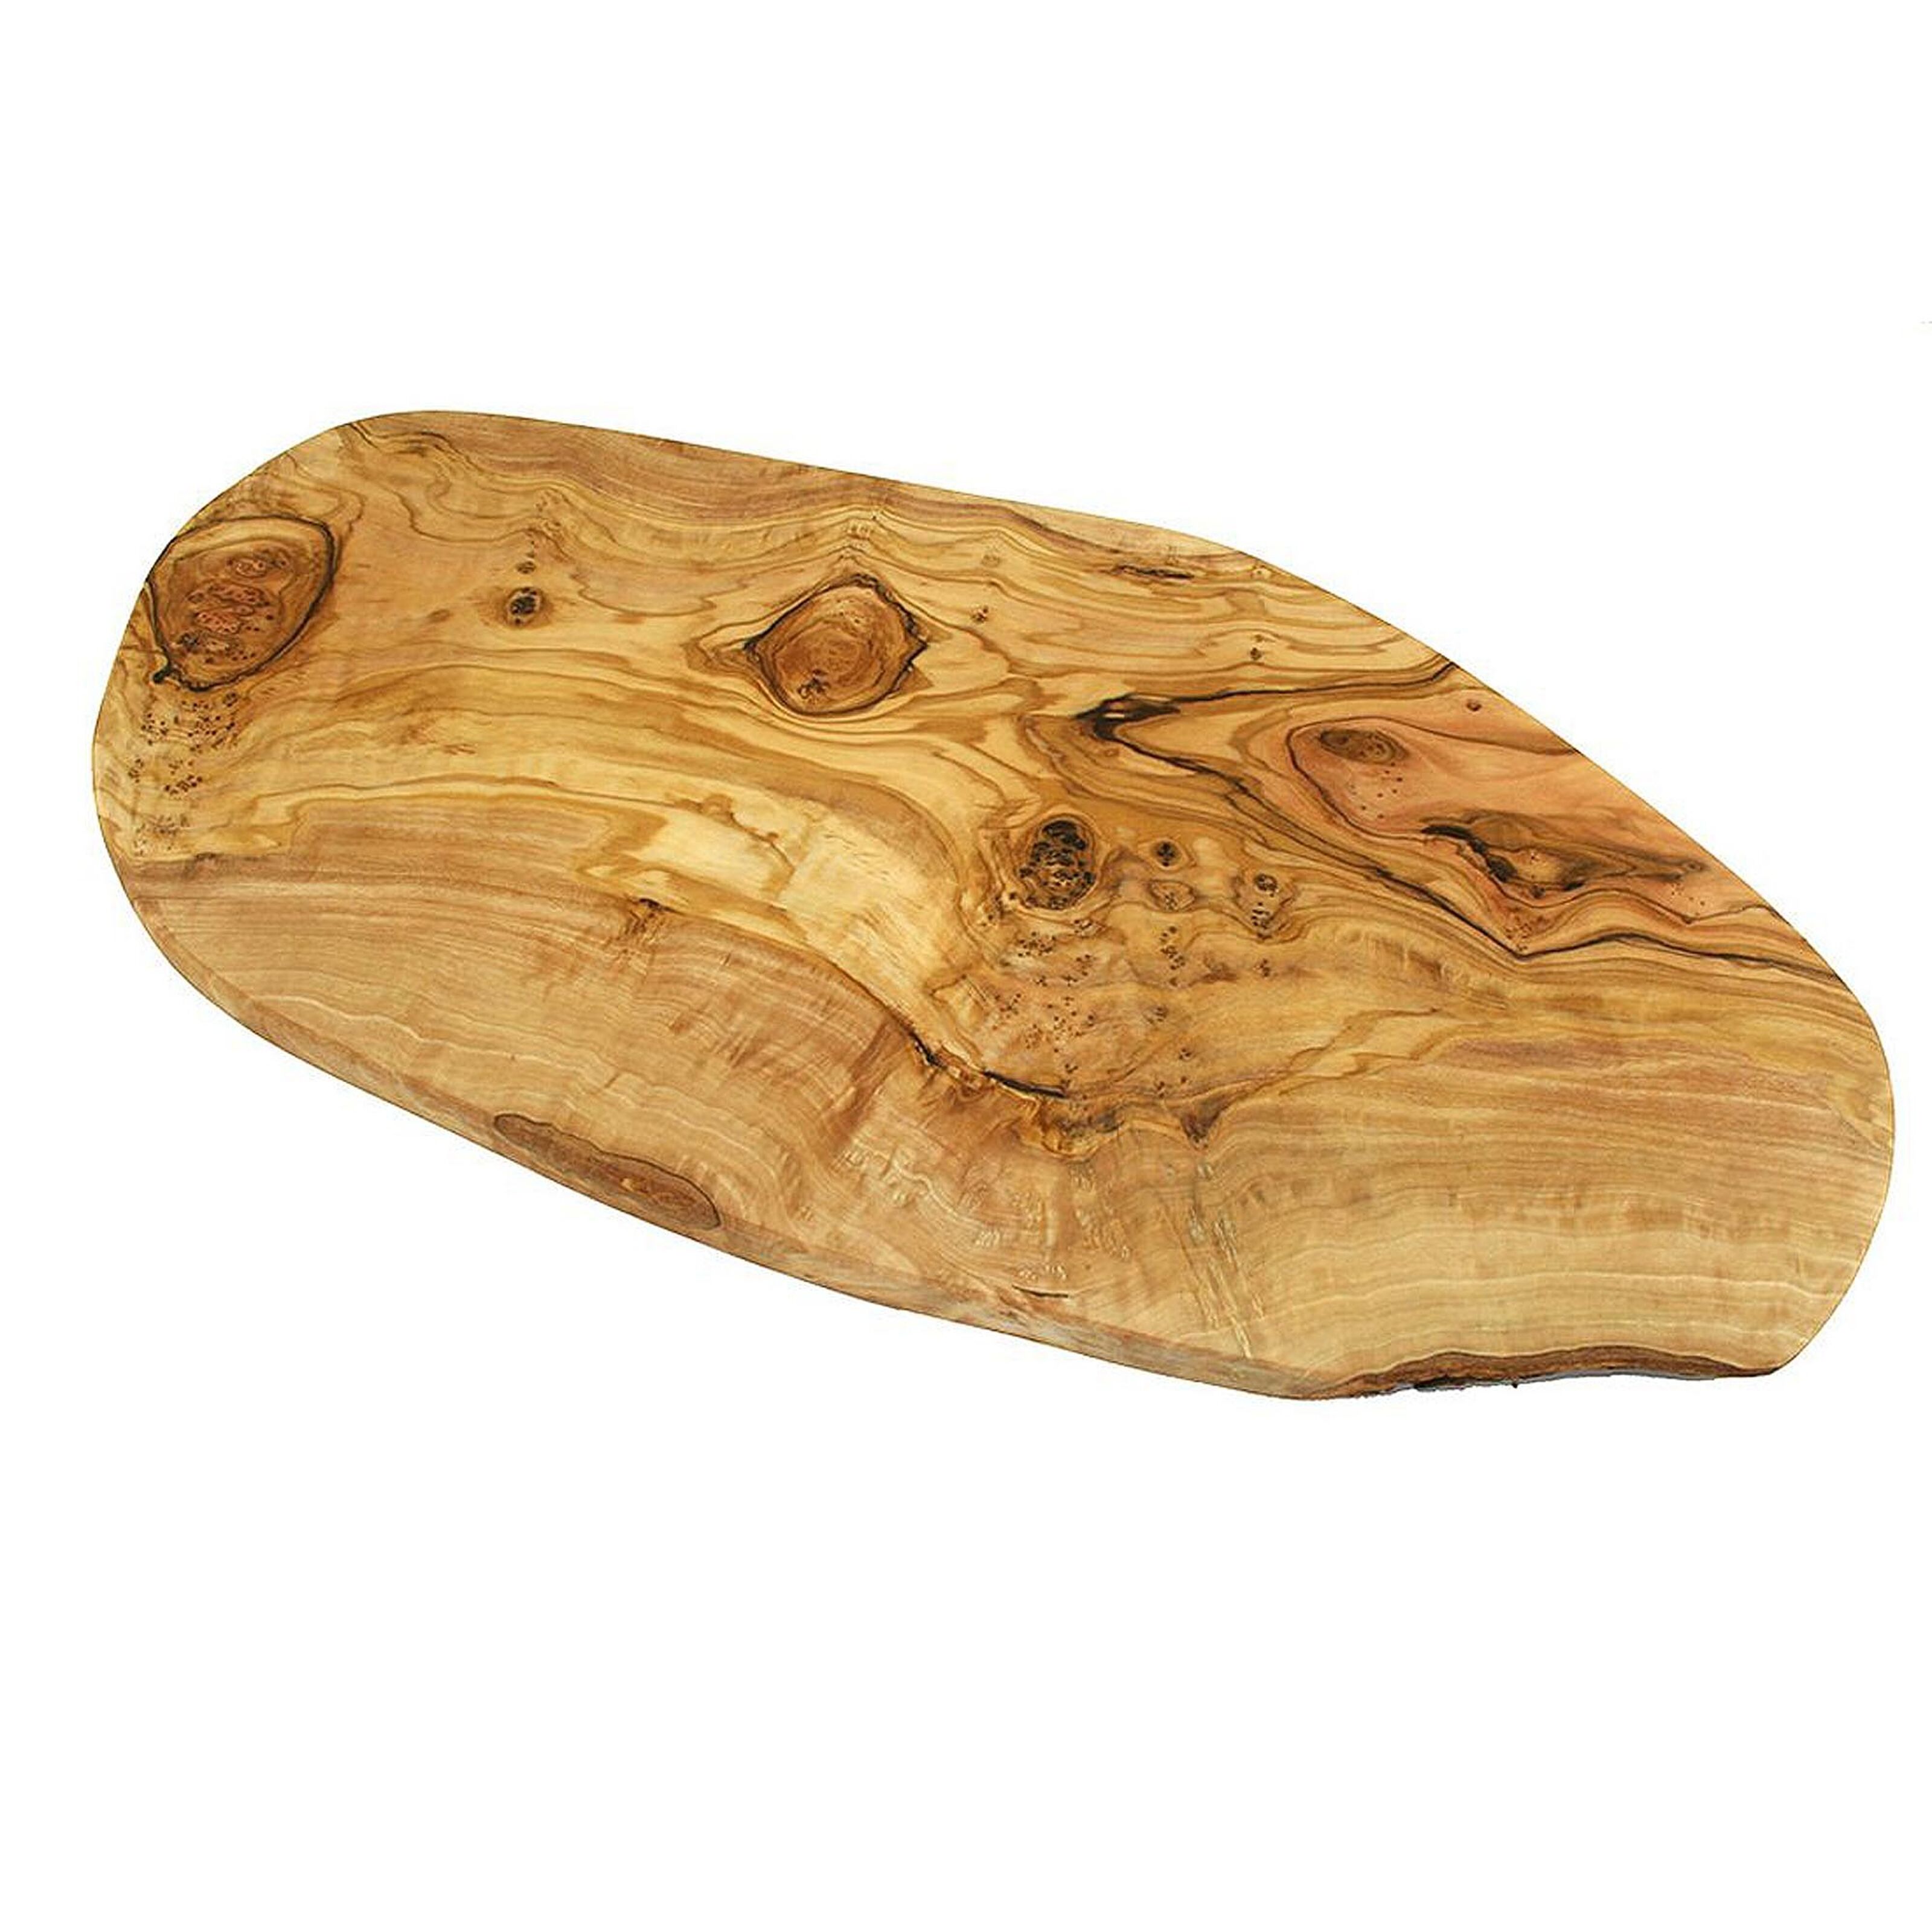 Buy wholesale wood cutting 25 or board approx. RUSTIC - (length: serving olive cm), 29